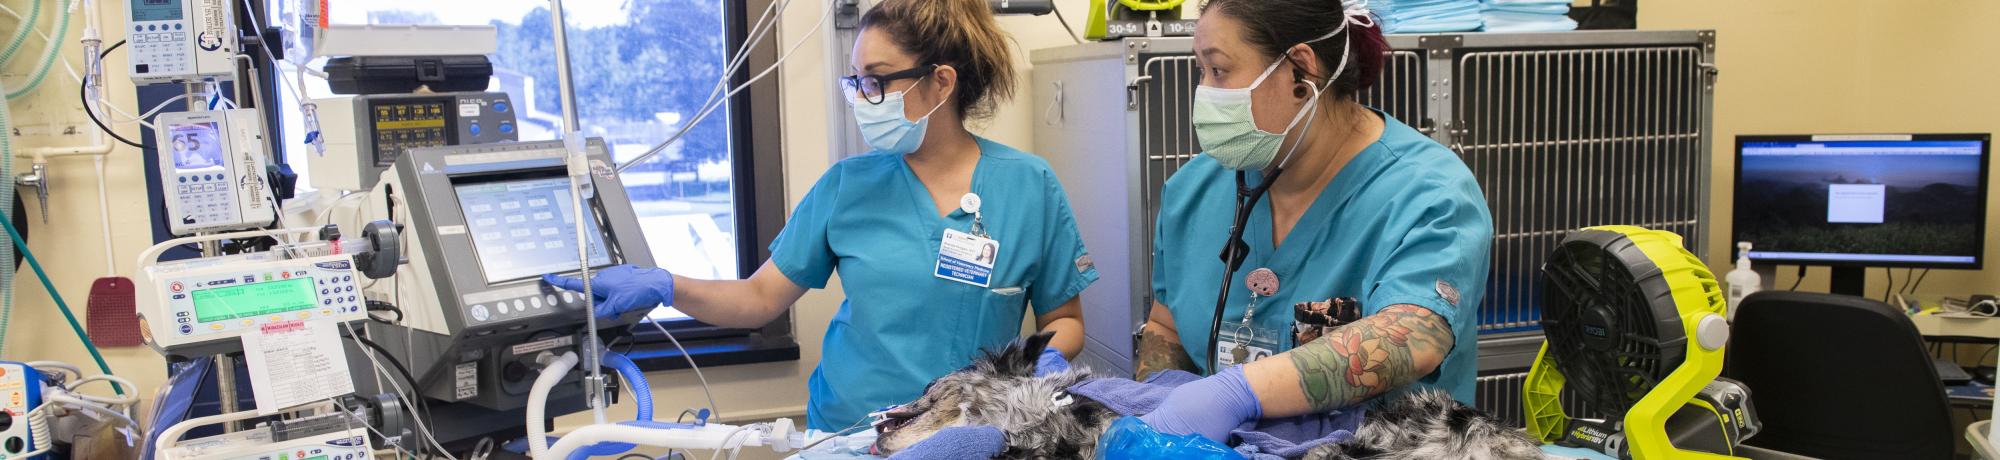 two technicians attending to a patient in the UC Davis veterinary hospital's ICU